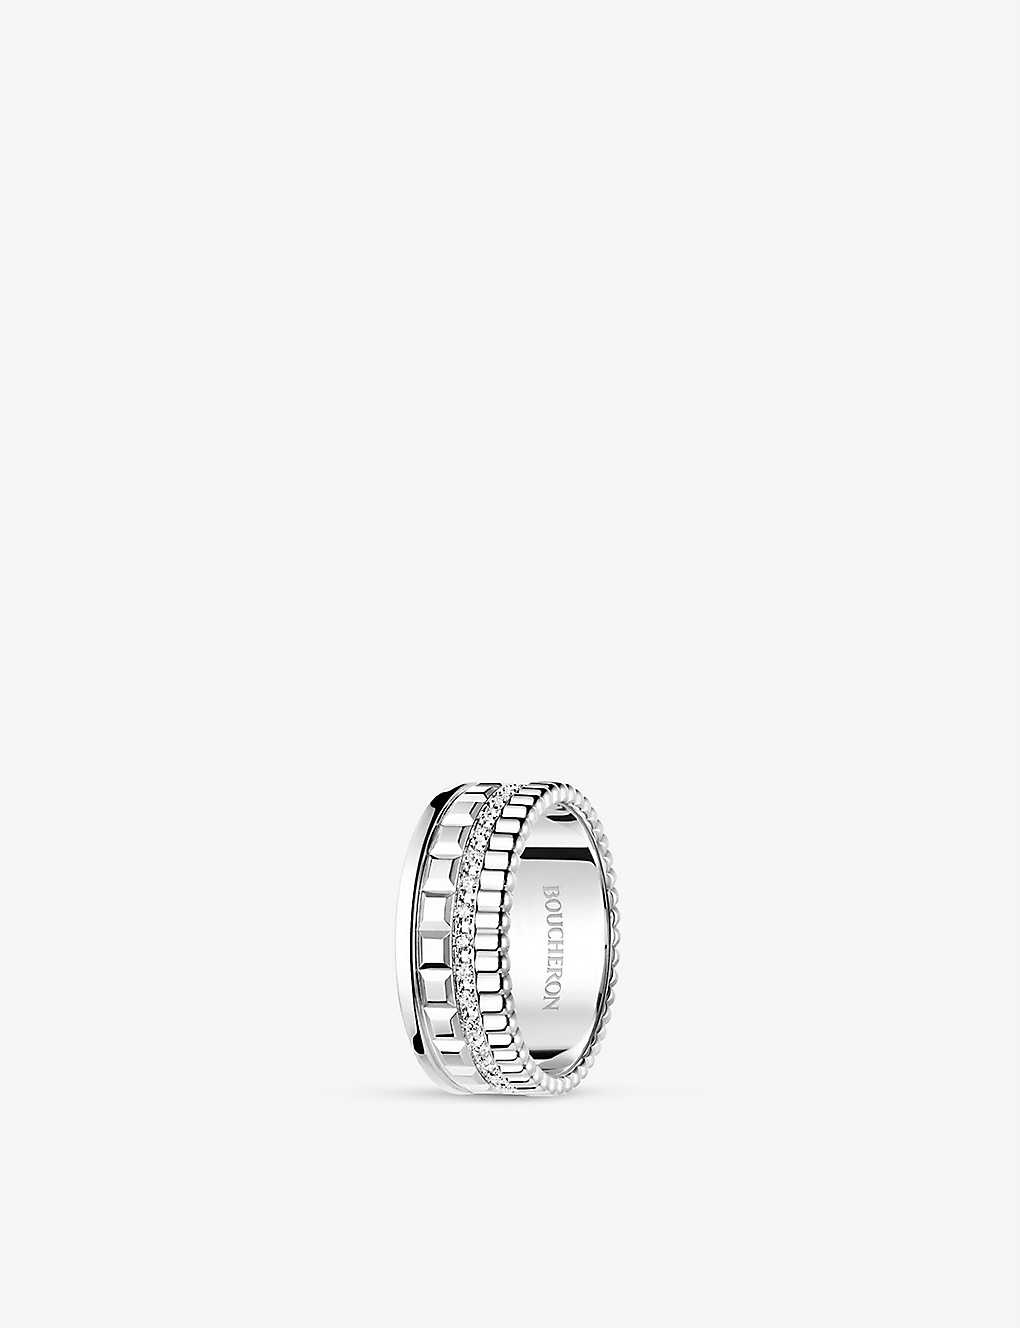 Quatre Radiant Edition white-gold and 0.24ct diamond ring - 3